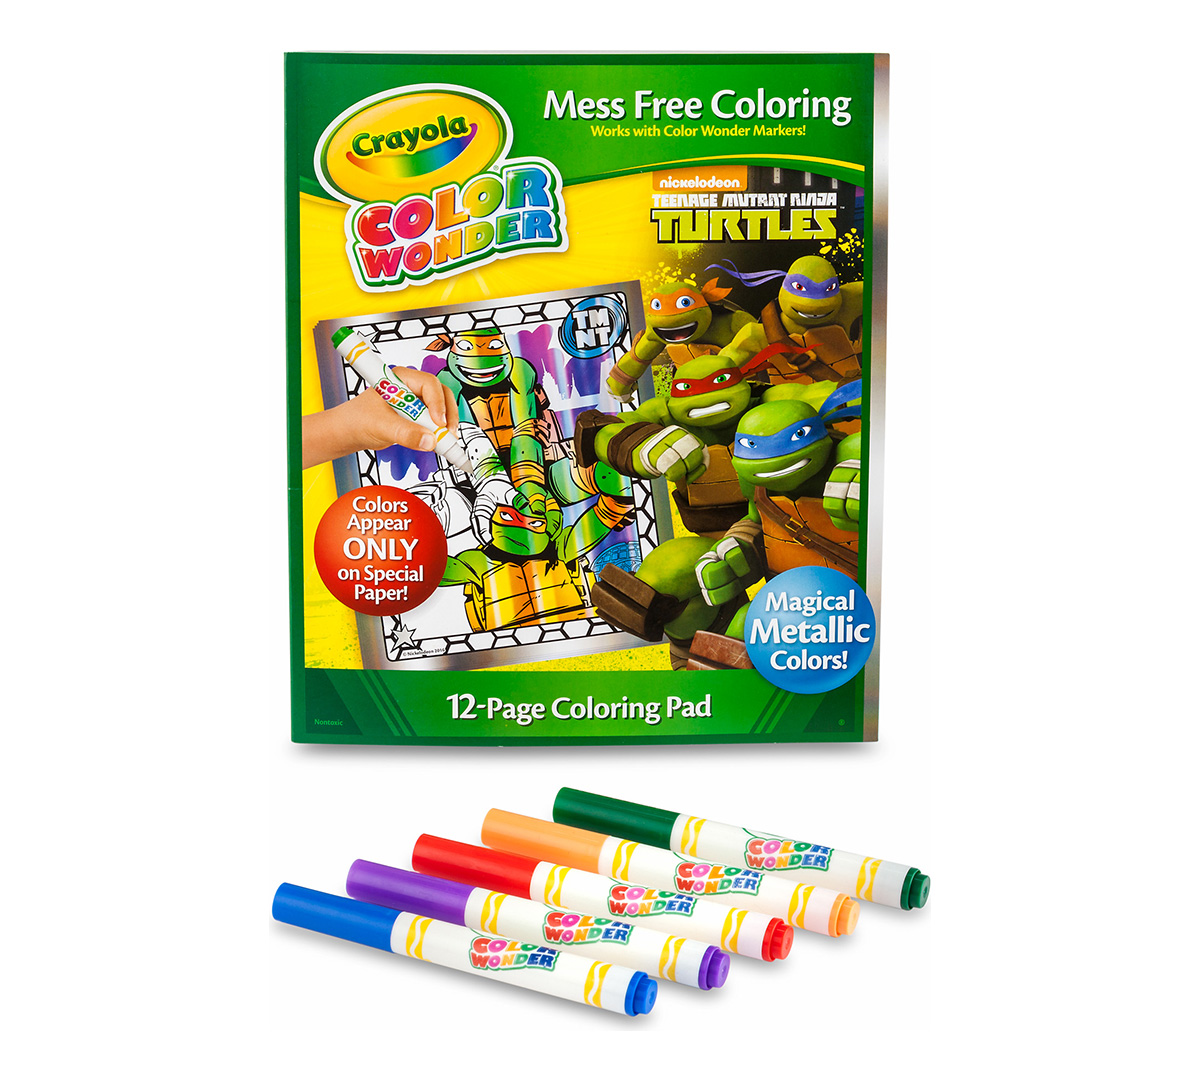 Crayola Color Wonder Nickelodeon Teenage Mutant Ninja Turtles Mess-Free Coloring Metallic Paper & Markers Set Art Gift for Kids & Toddlers 3 & Up Clothes or Furniture Markers Wont Mark Walls 